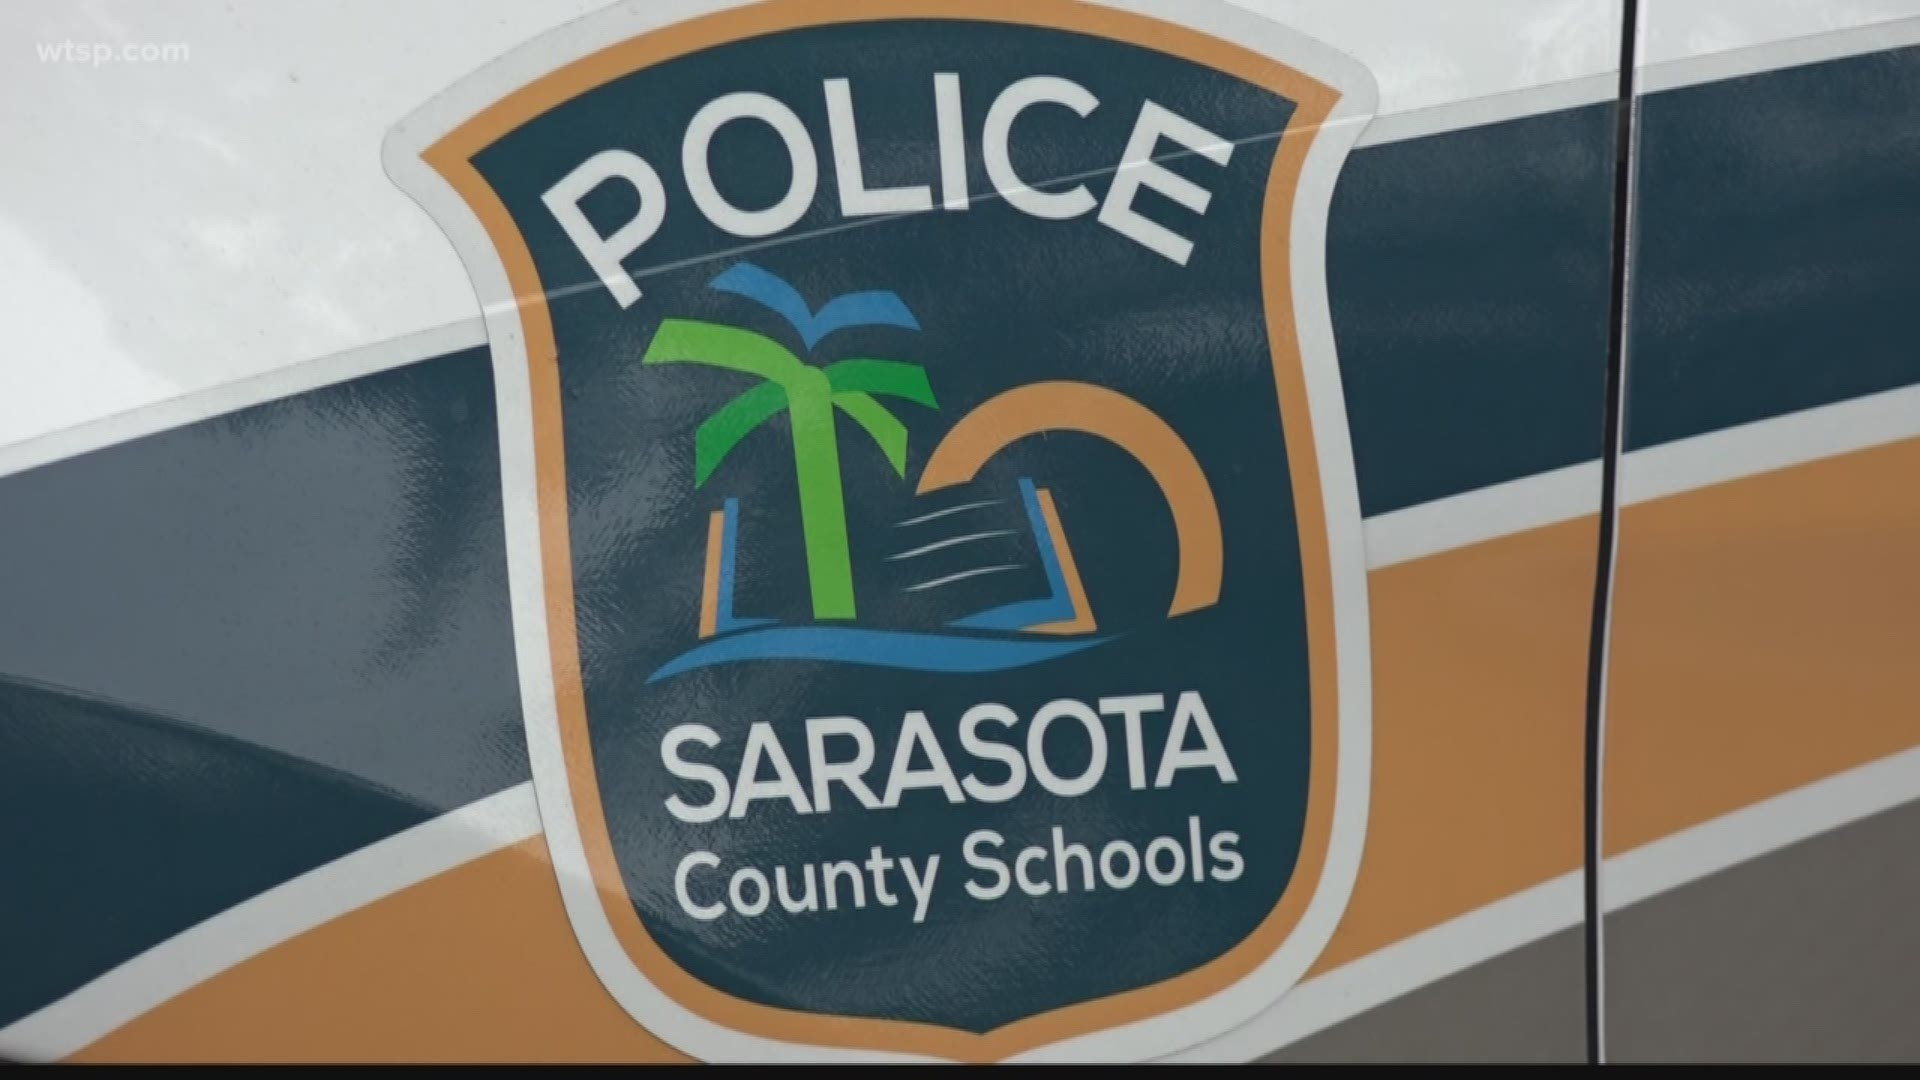 As state legislators consider bills that would put guns in the hands of teachers, one local school board is saying, “Not in our district.”

The Sarasota County School Board has other ways to help keep its students safe.

The board Tuesday approved a resolution to ban teachers carrying guns by a 3-2 vote.